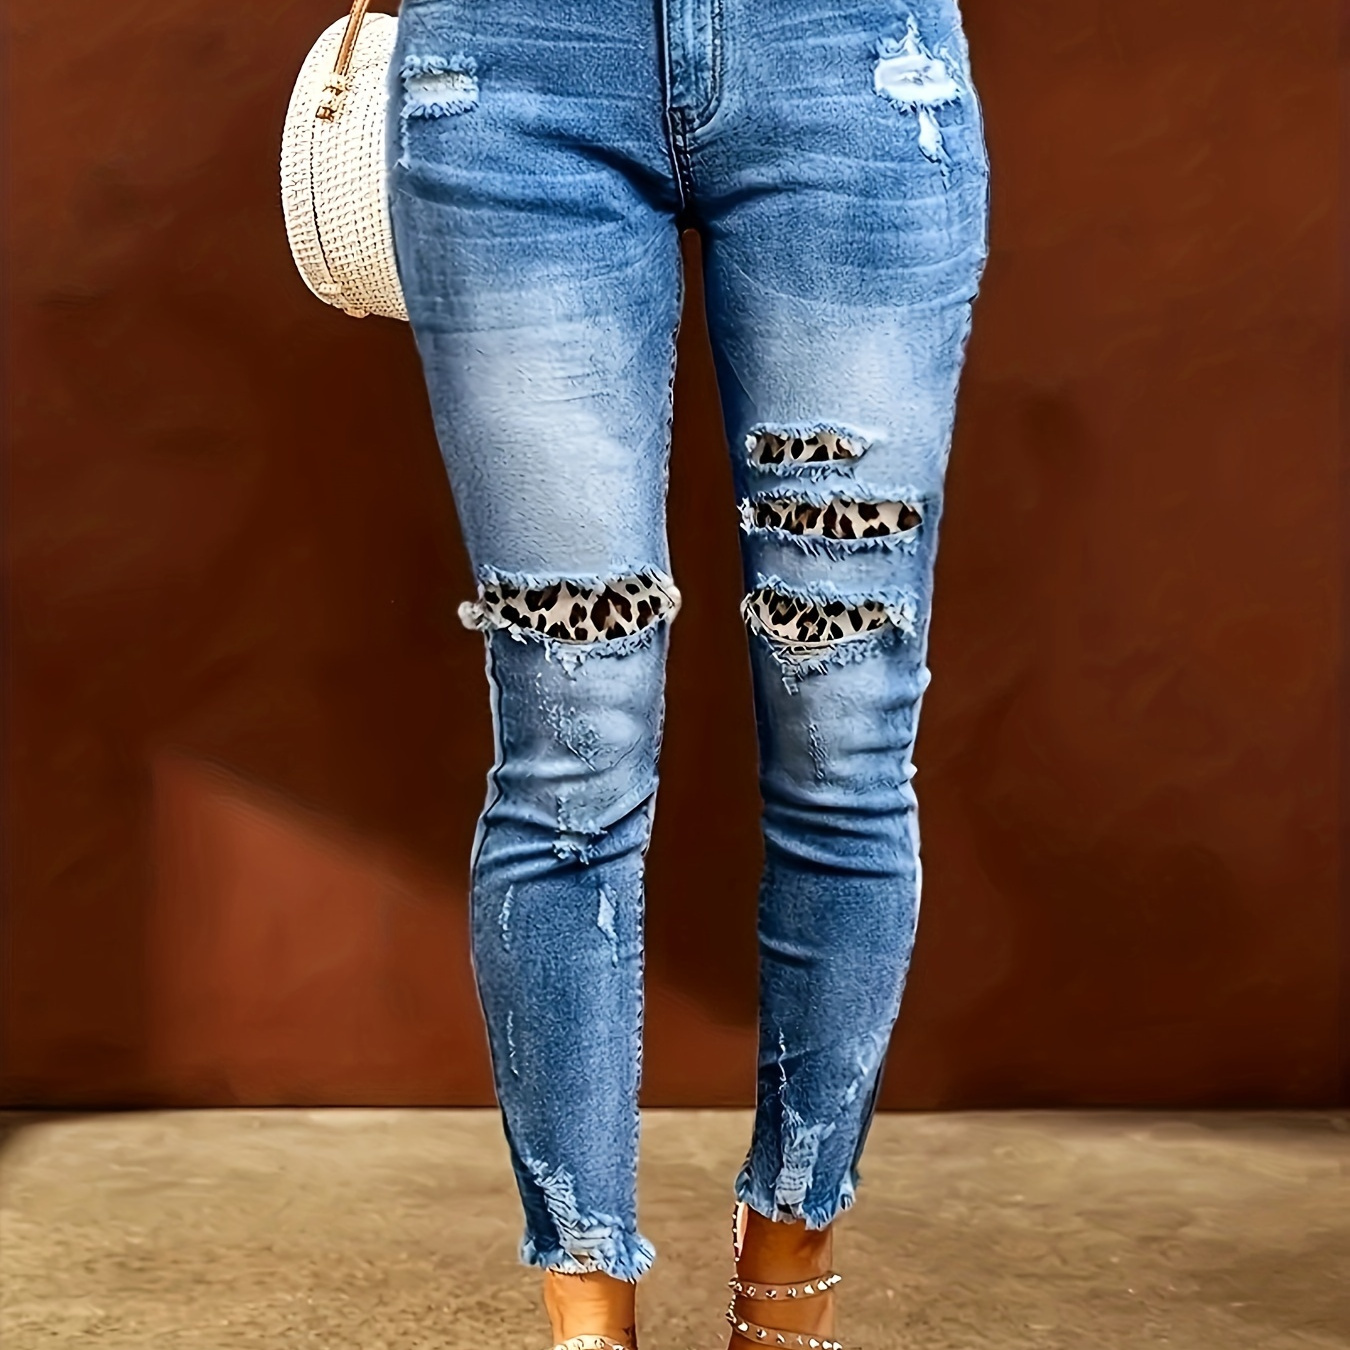 

Women's Distressed Frayed Hem Skinny Jeans, Casual Style, Denim Blue, Ankle-length Pants With Ripped Leopard Accents Patchwork